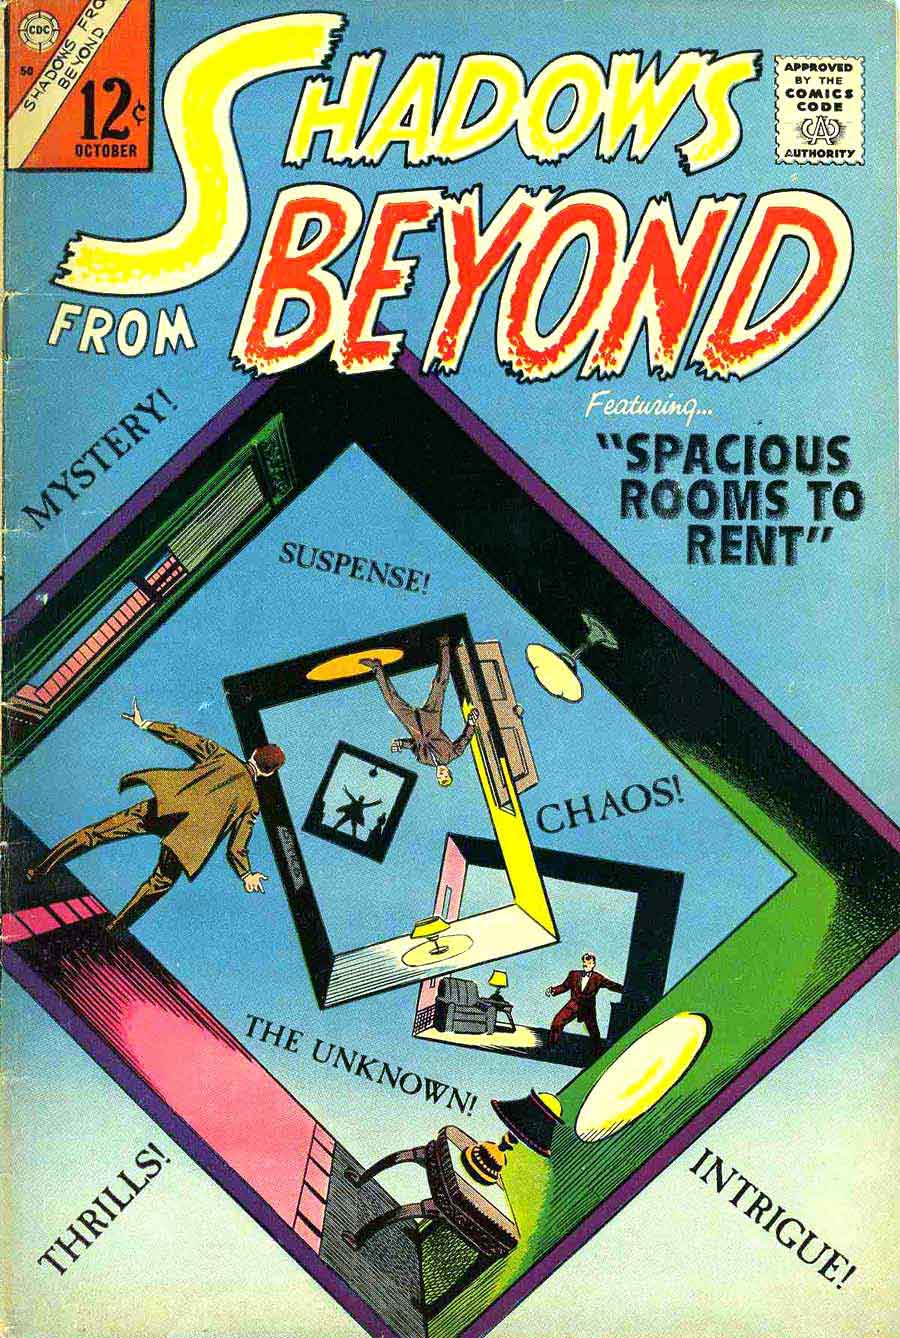 Shadows from Beyond v2 #50 silver age comic book cover by Steve Ditko